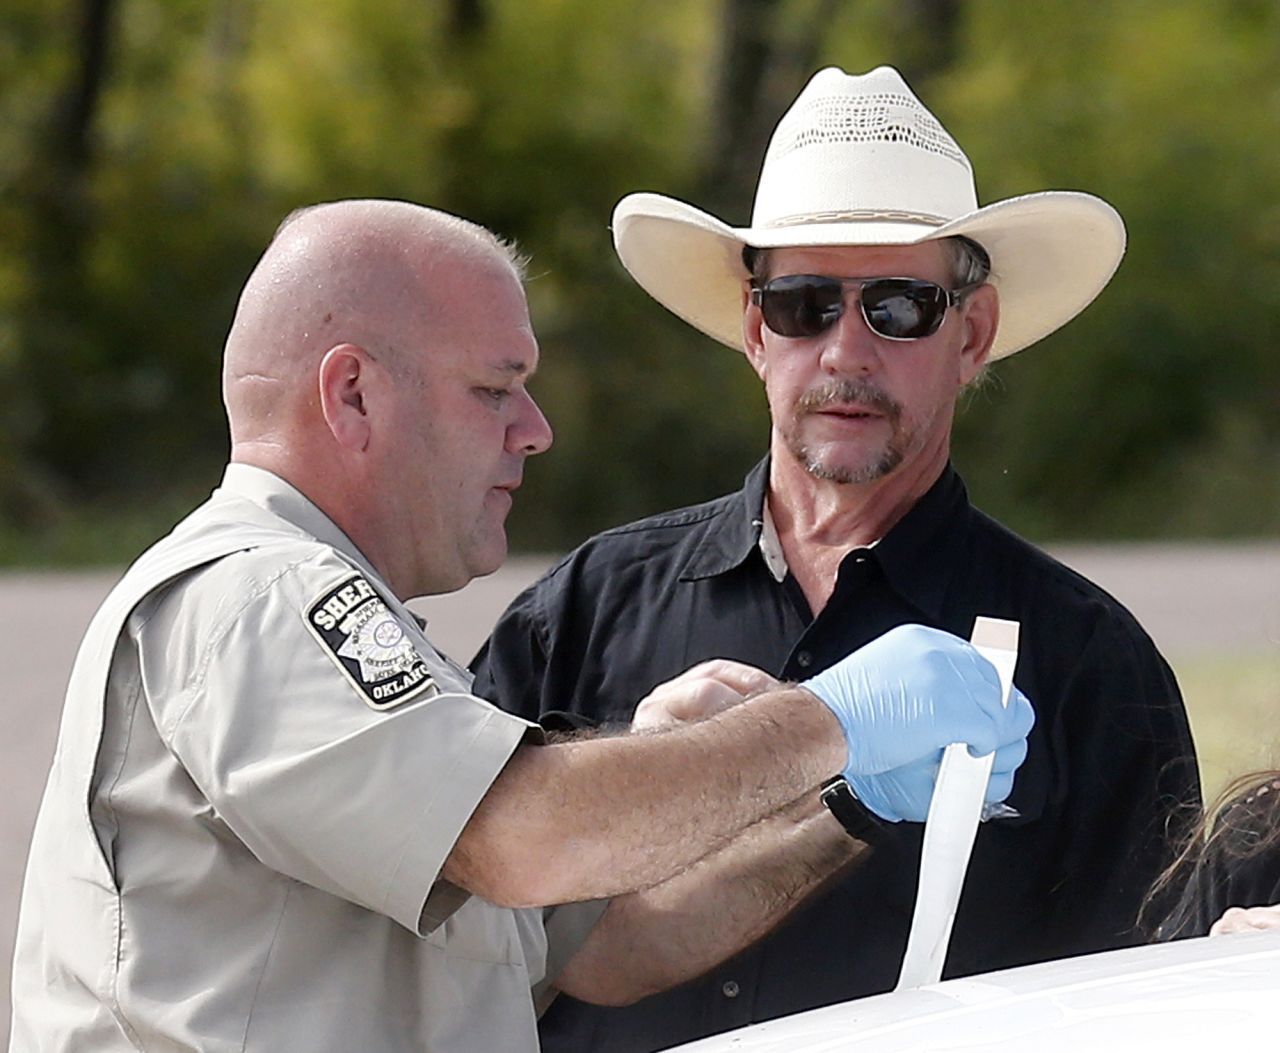 Tim Porter, right, talks with Beckham County Sheriff's Deputy J. Kessel after giving a DNA sample at the scene in September 2013. Porter believed his grandfather's remains were in one of the cars.